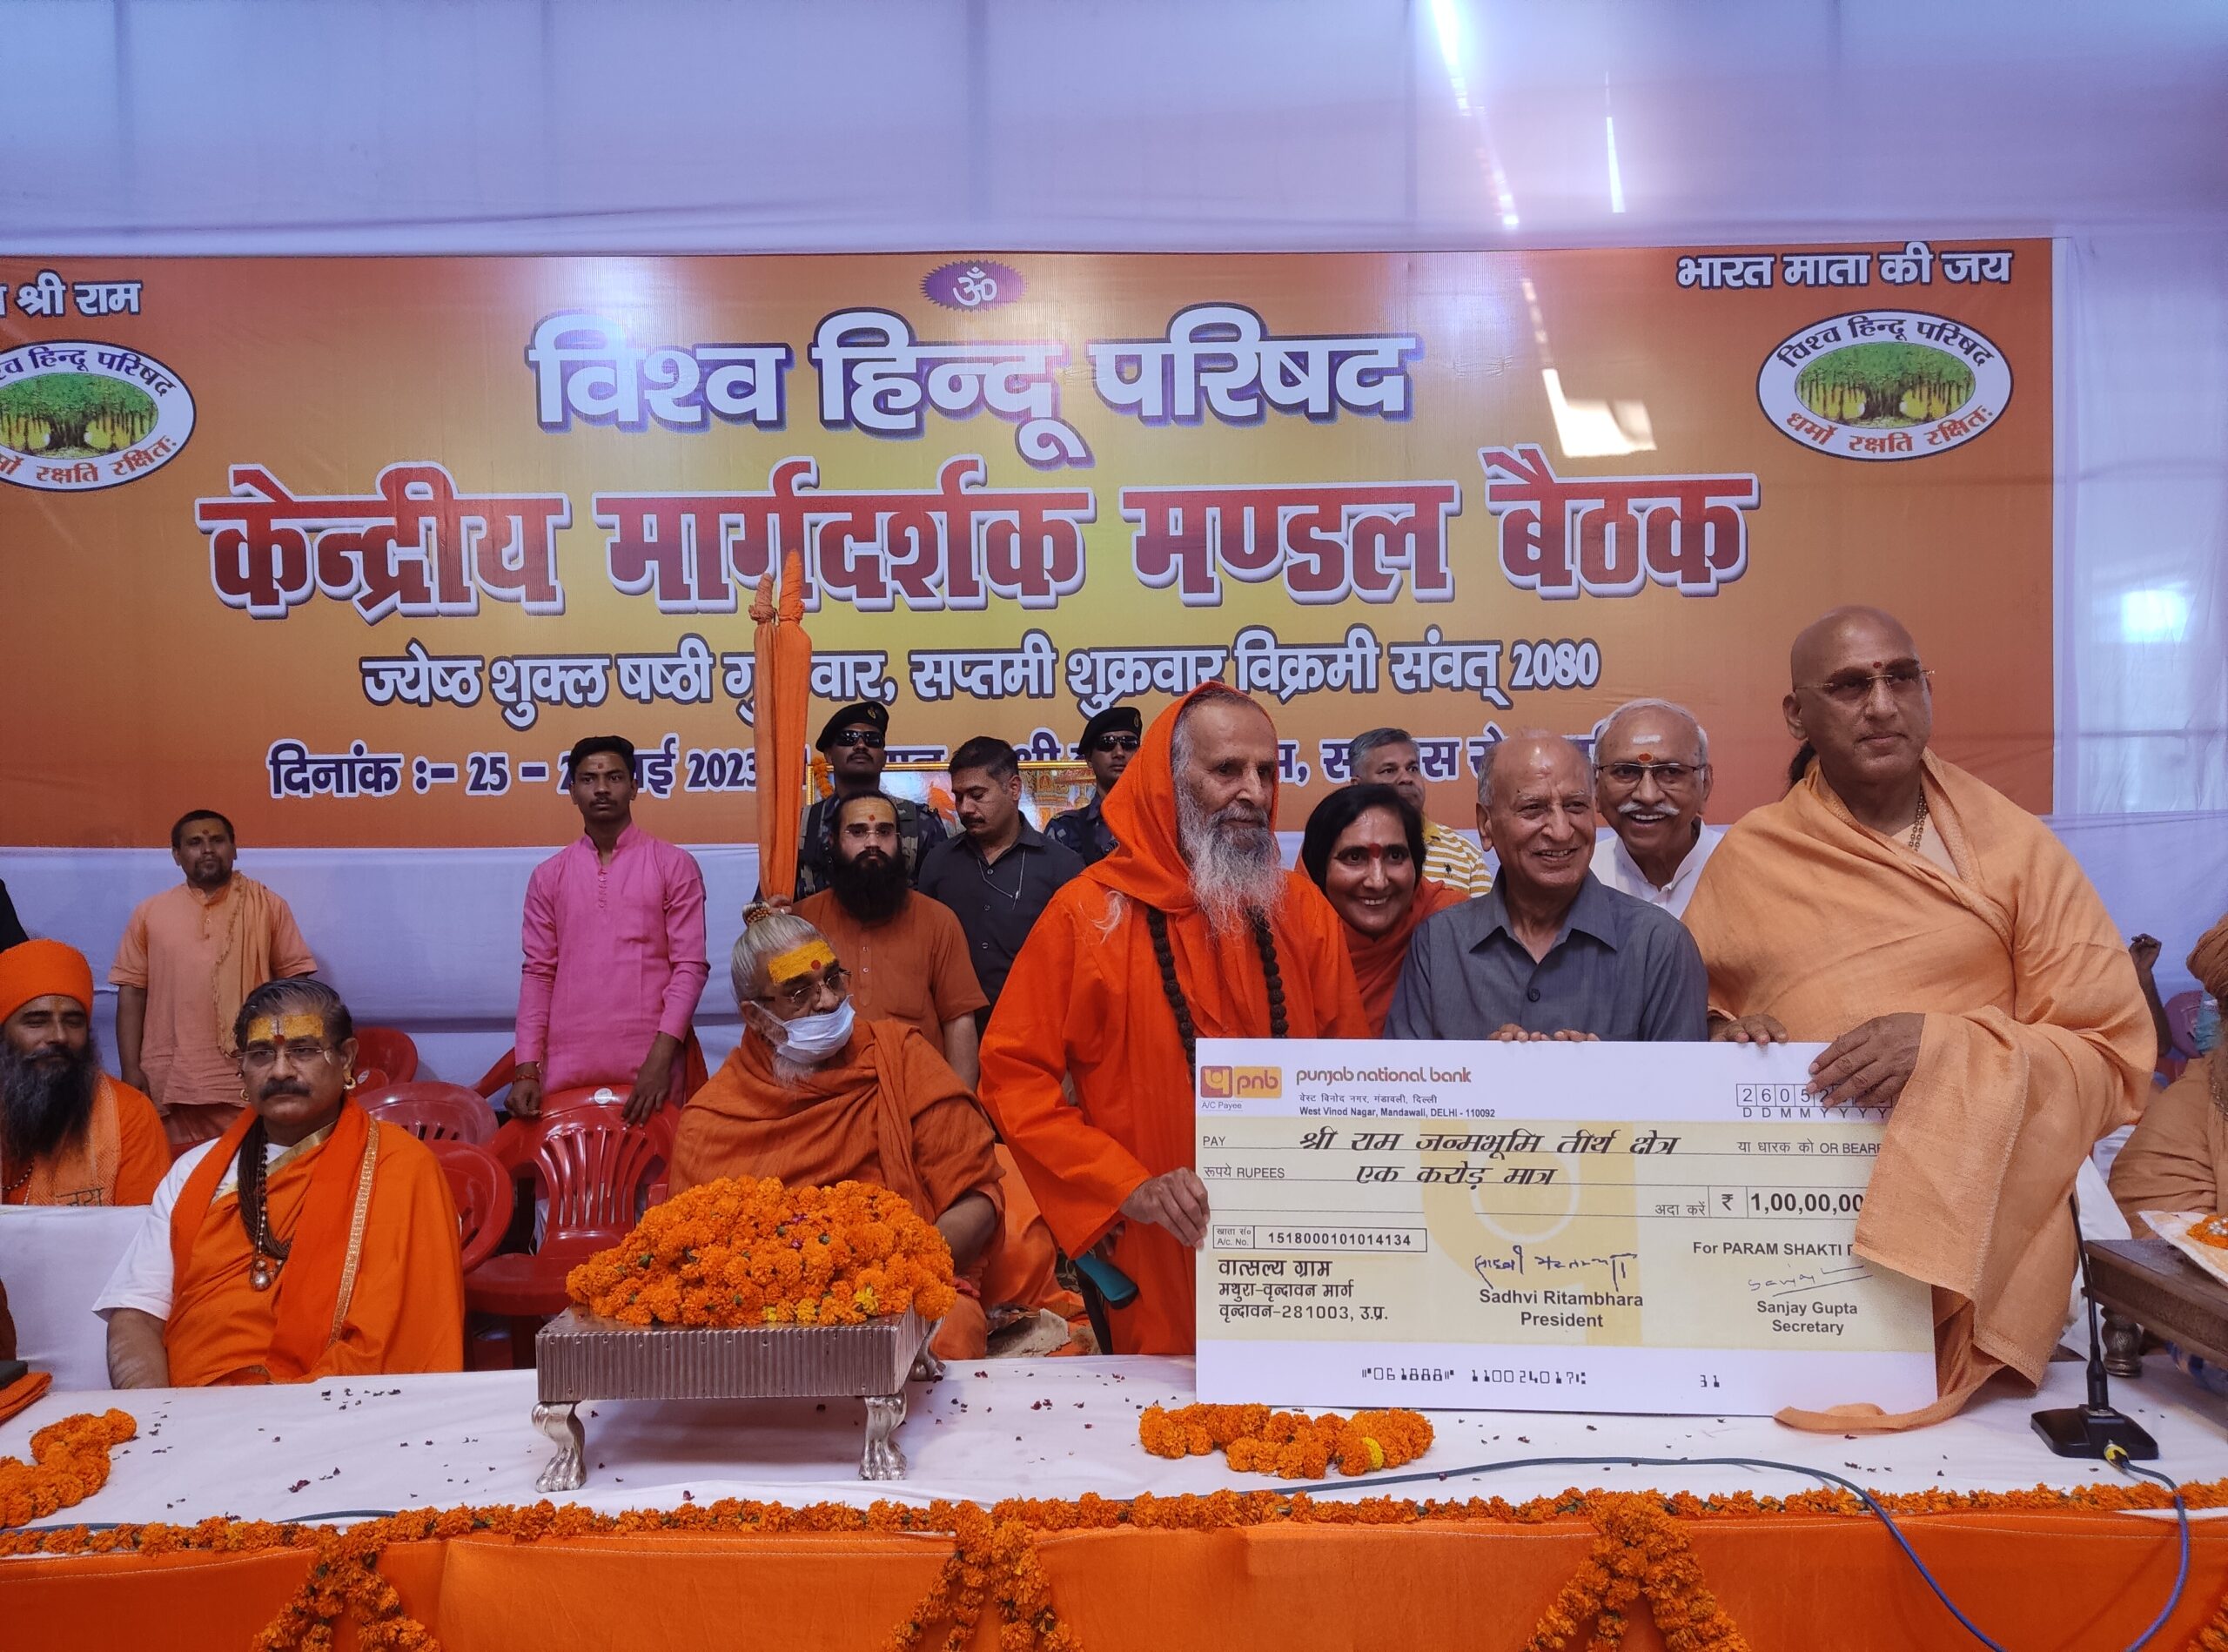 Saint presenting check for construction of Ram temple